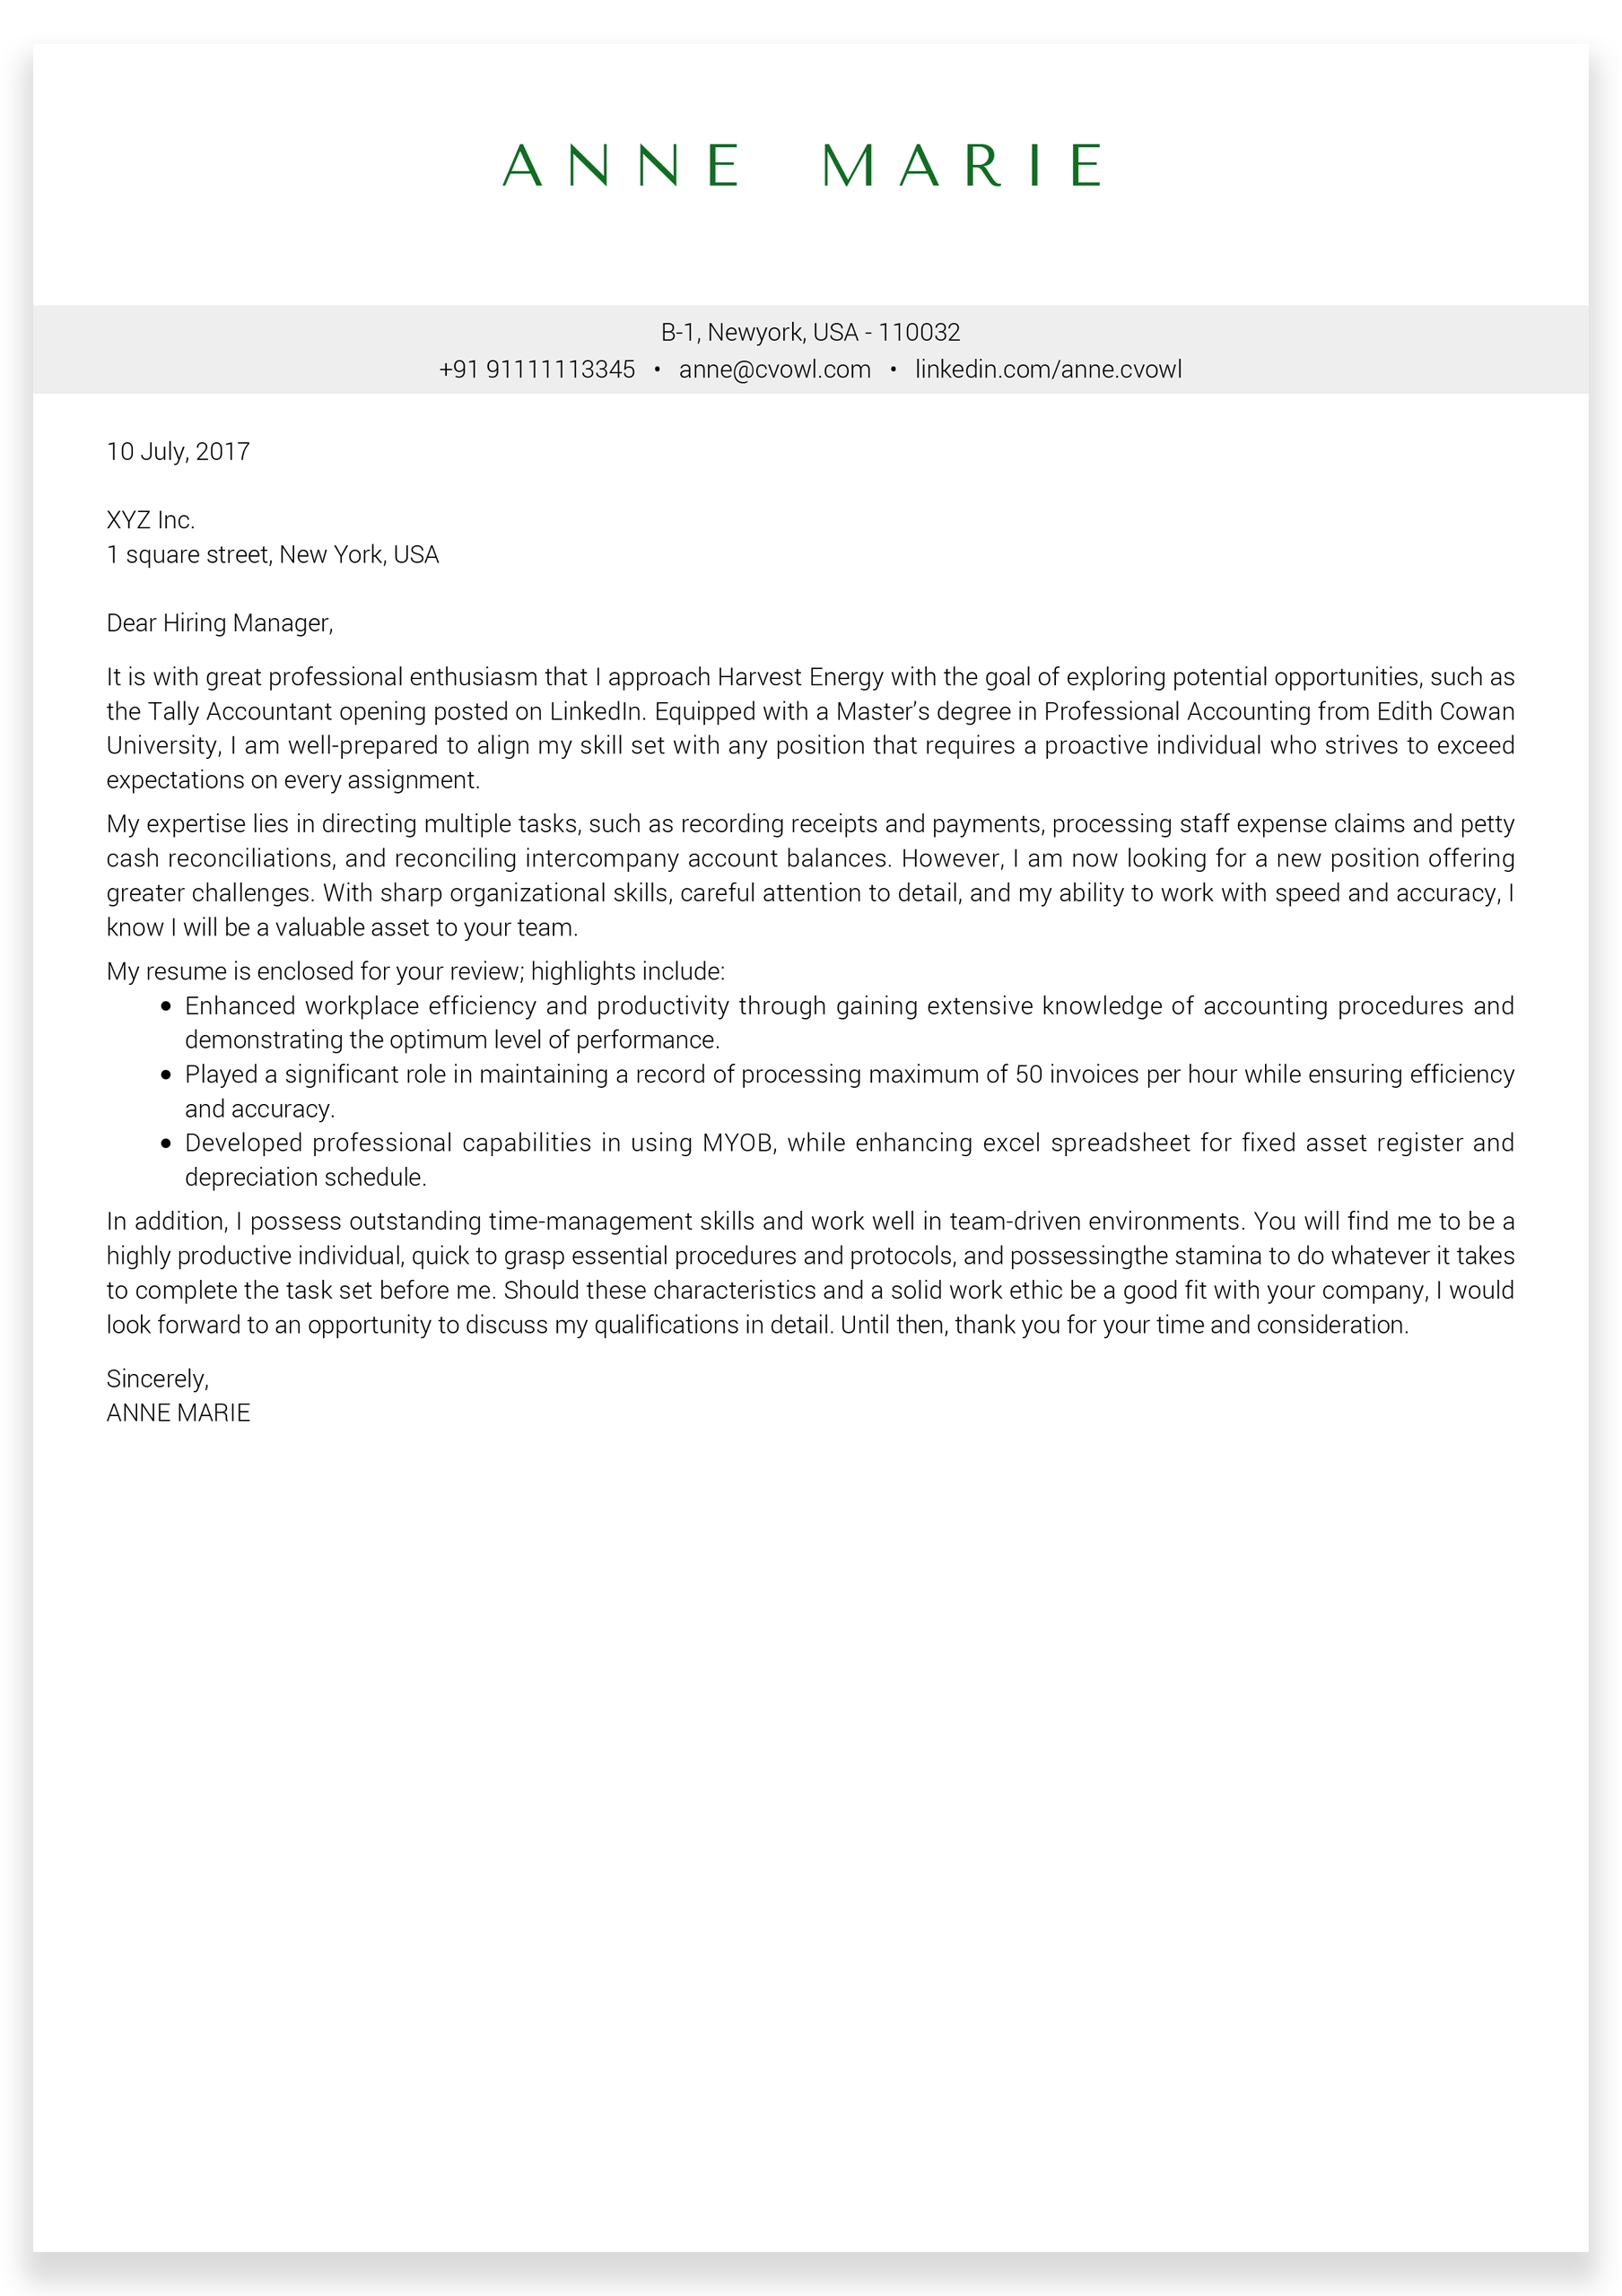 Anaesthesia-Technician-Cover-Letter-sample2